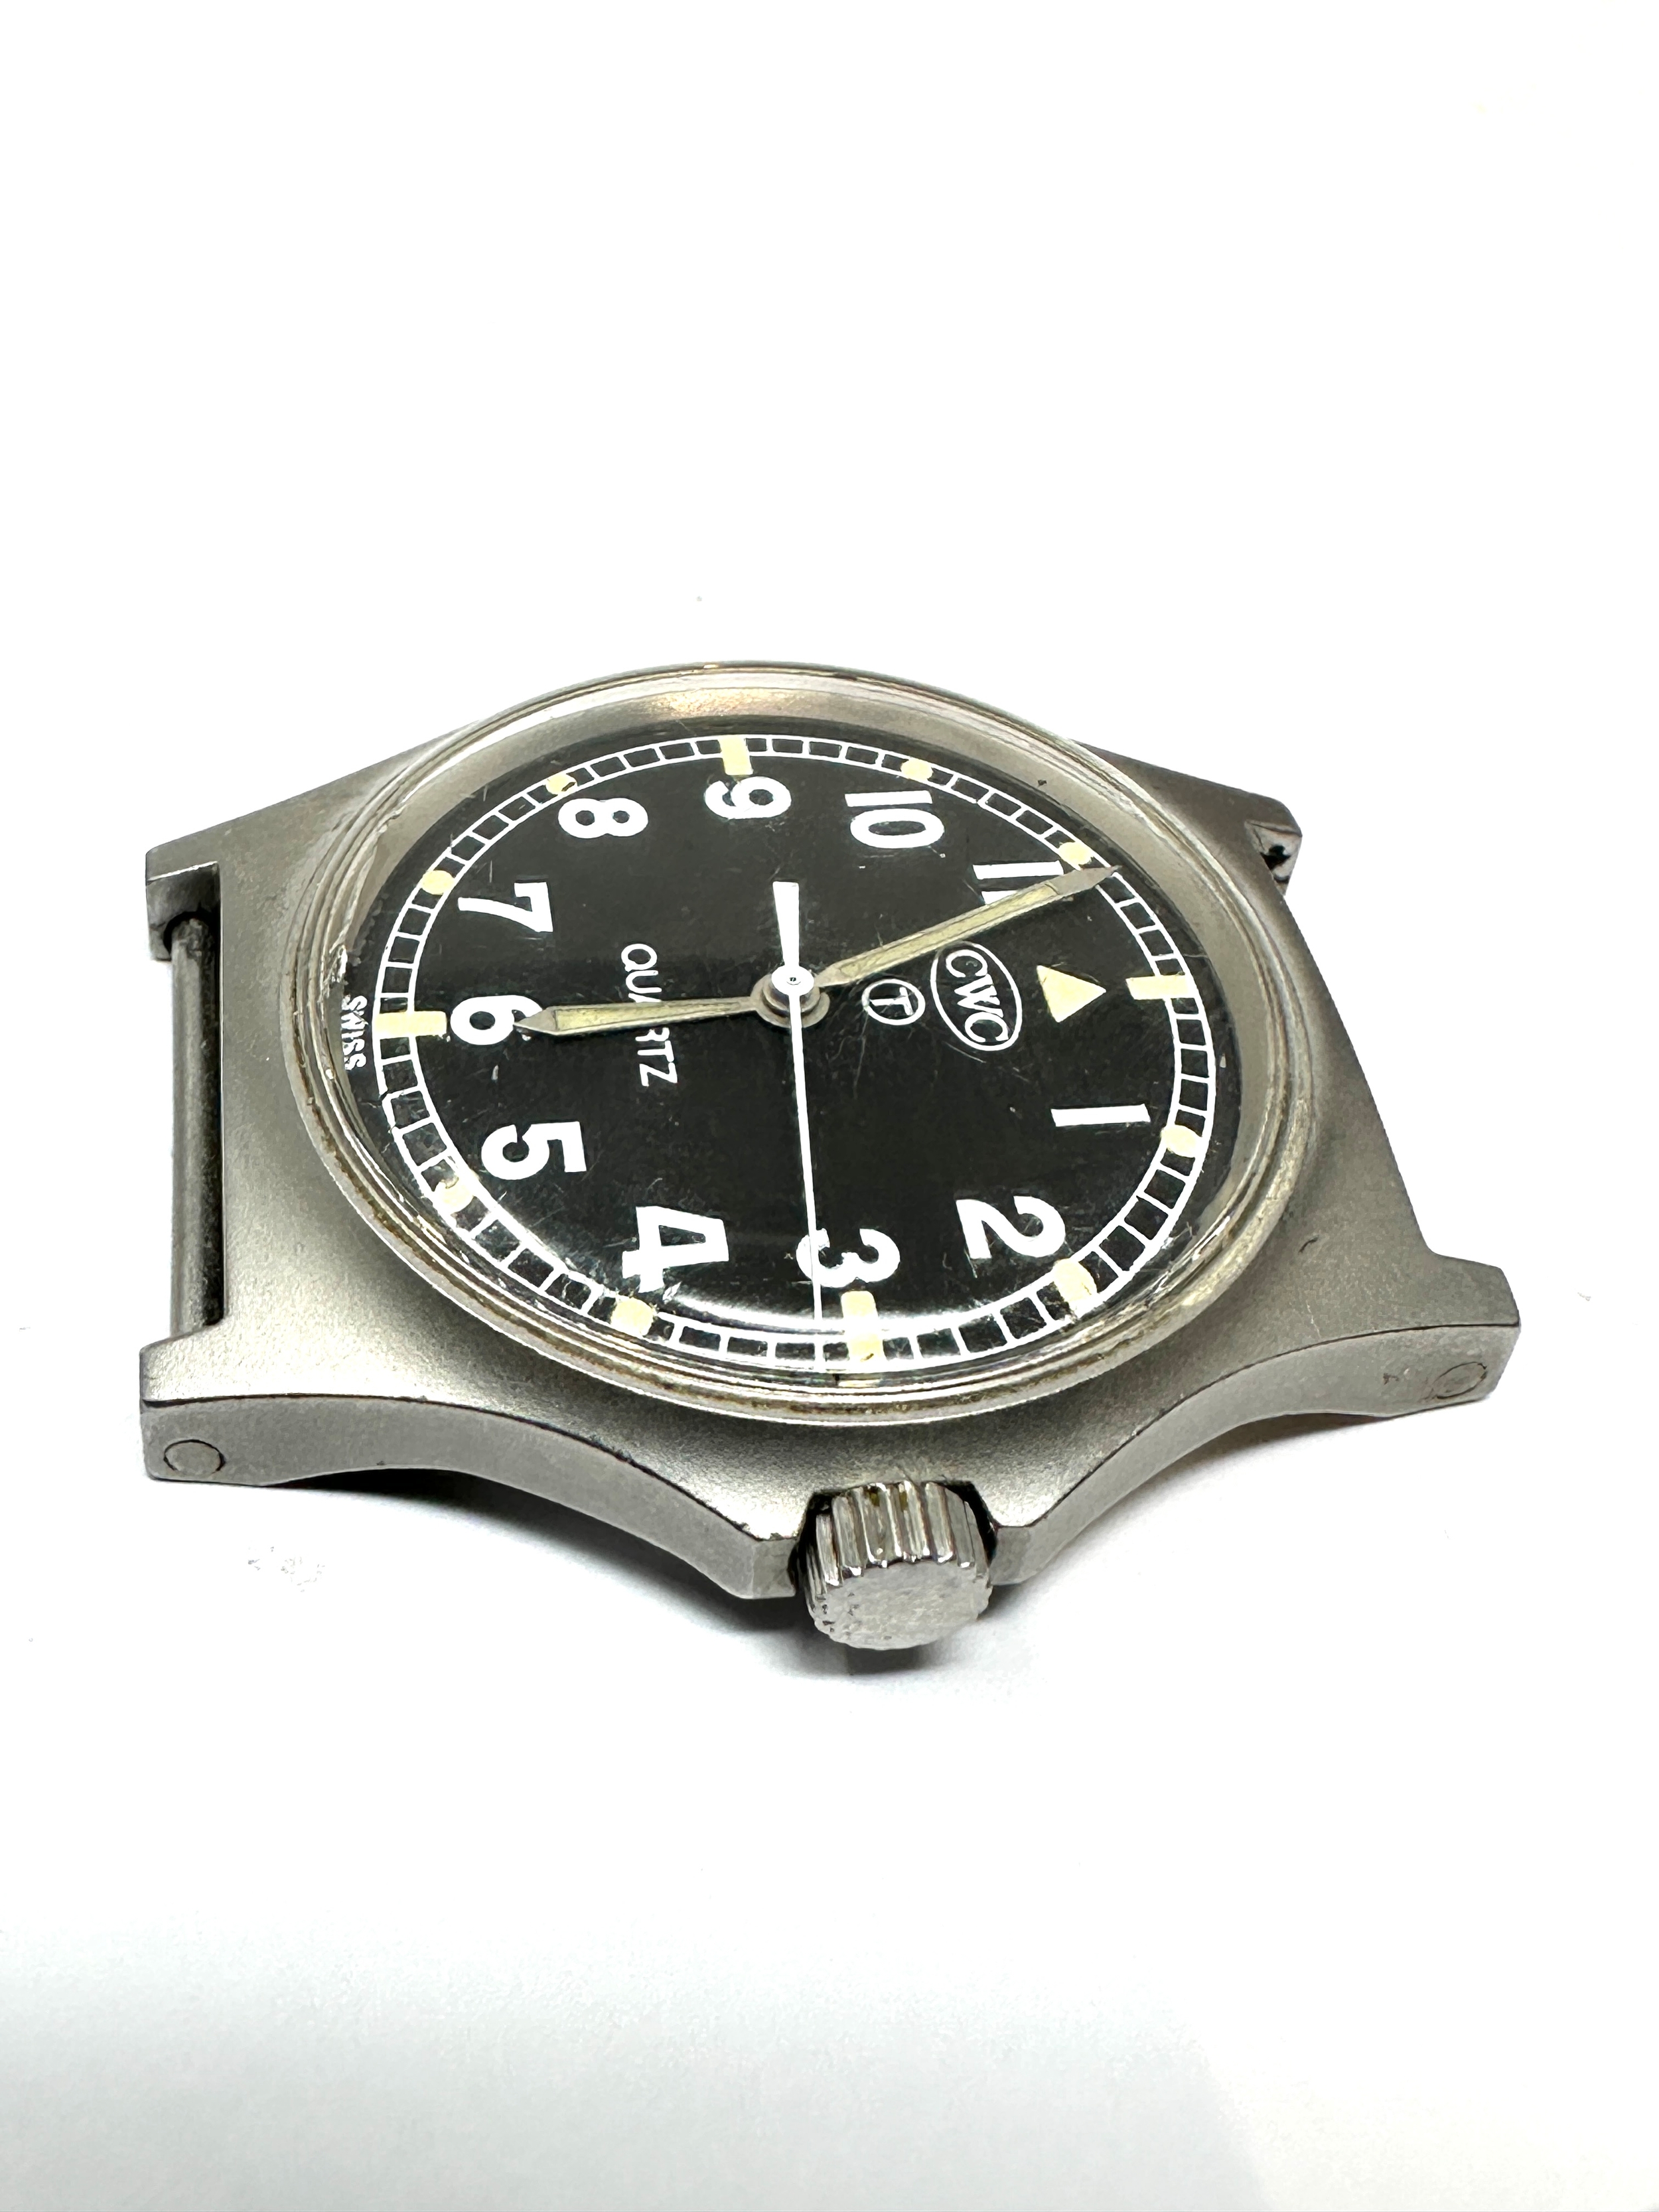 CWC G10 military watch 0552 Royal Navy/Royal Marine Issue In Working Order - Image 2 of 3